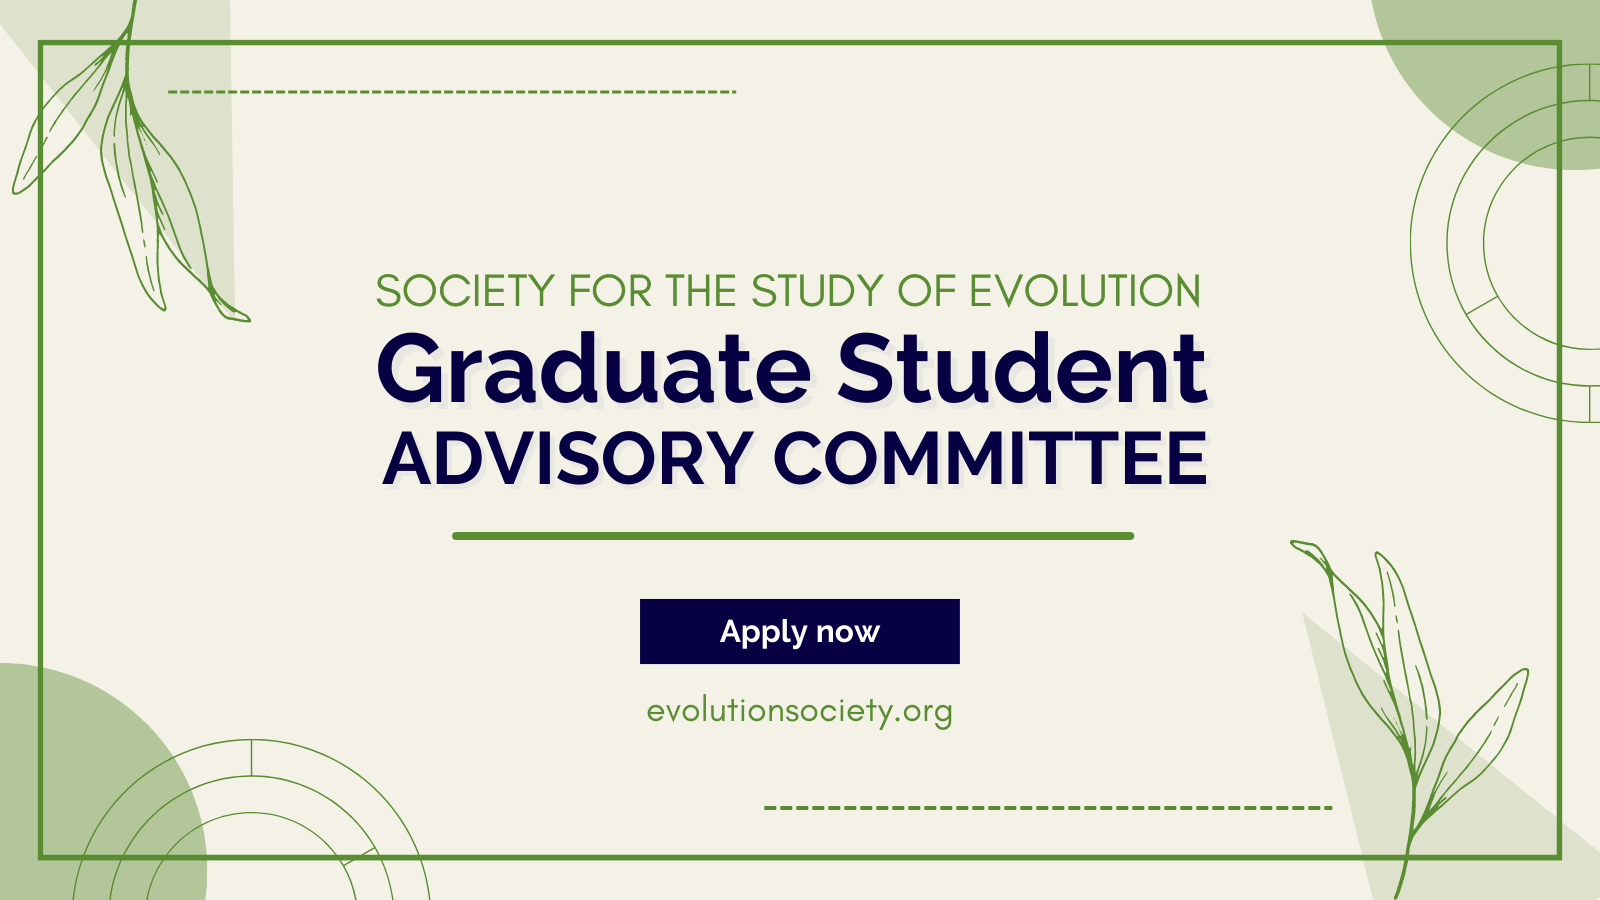 Text: Society for the Study of Evolution Graduate Student Advisory Committee. Apply now: evolutionsociety.org.